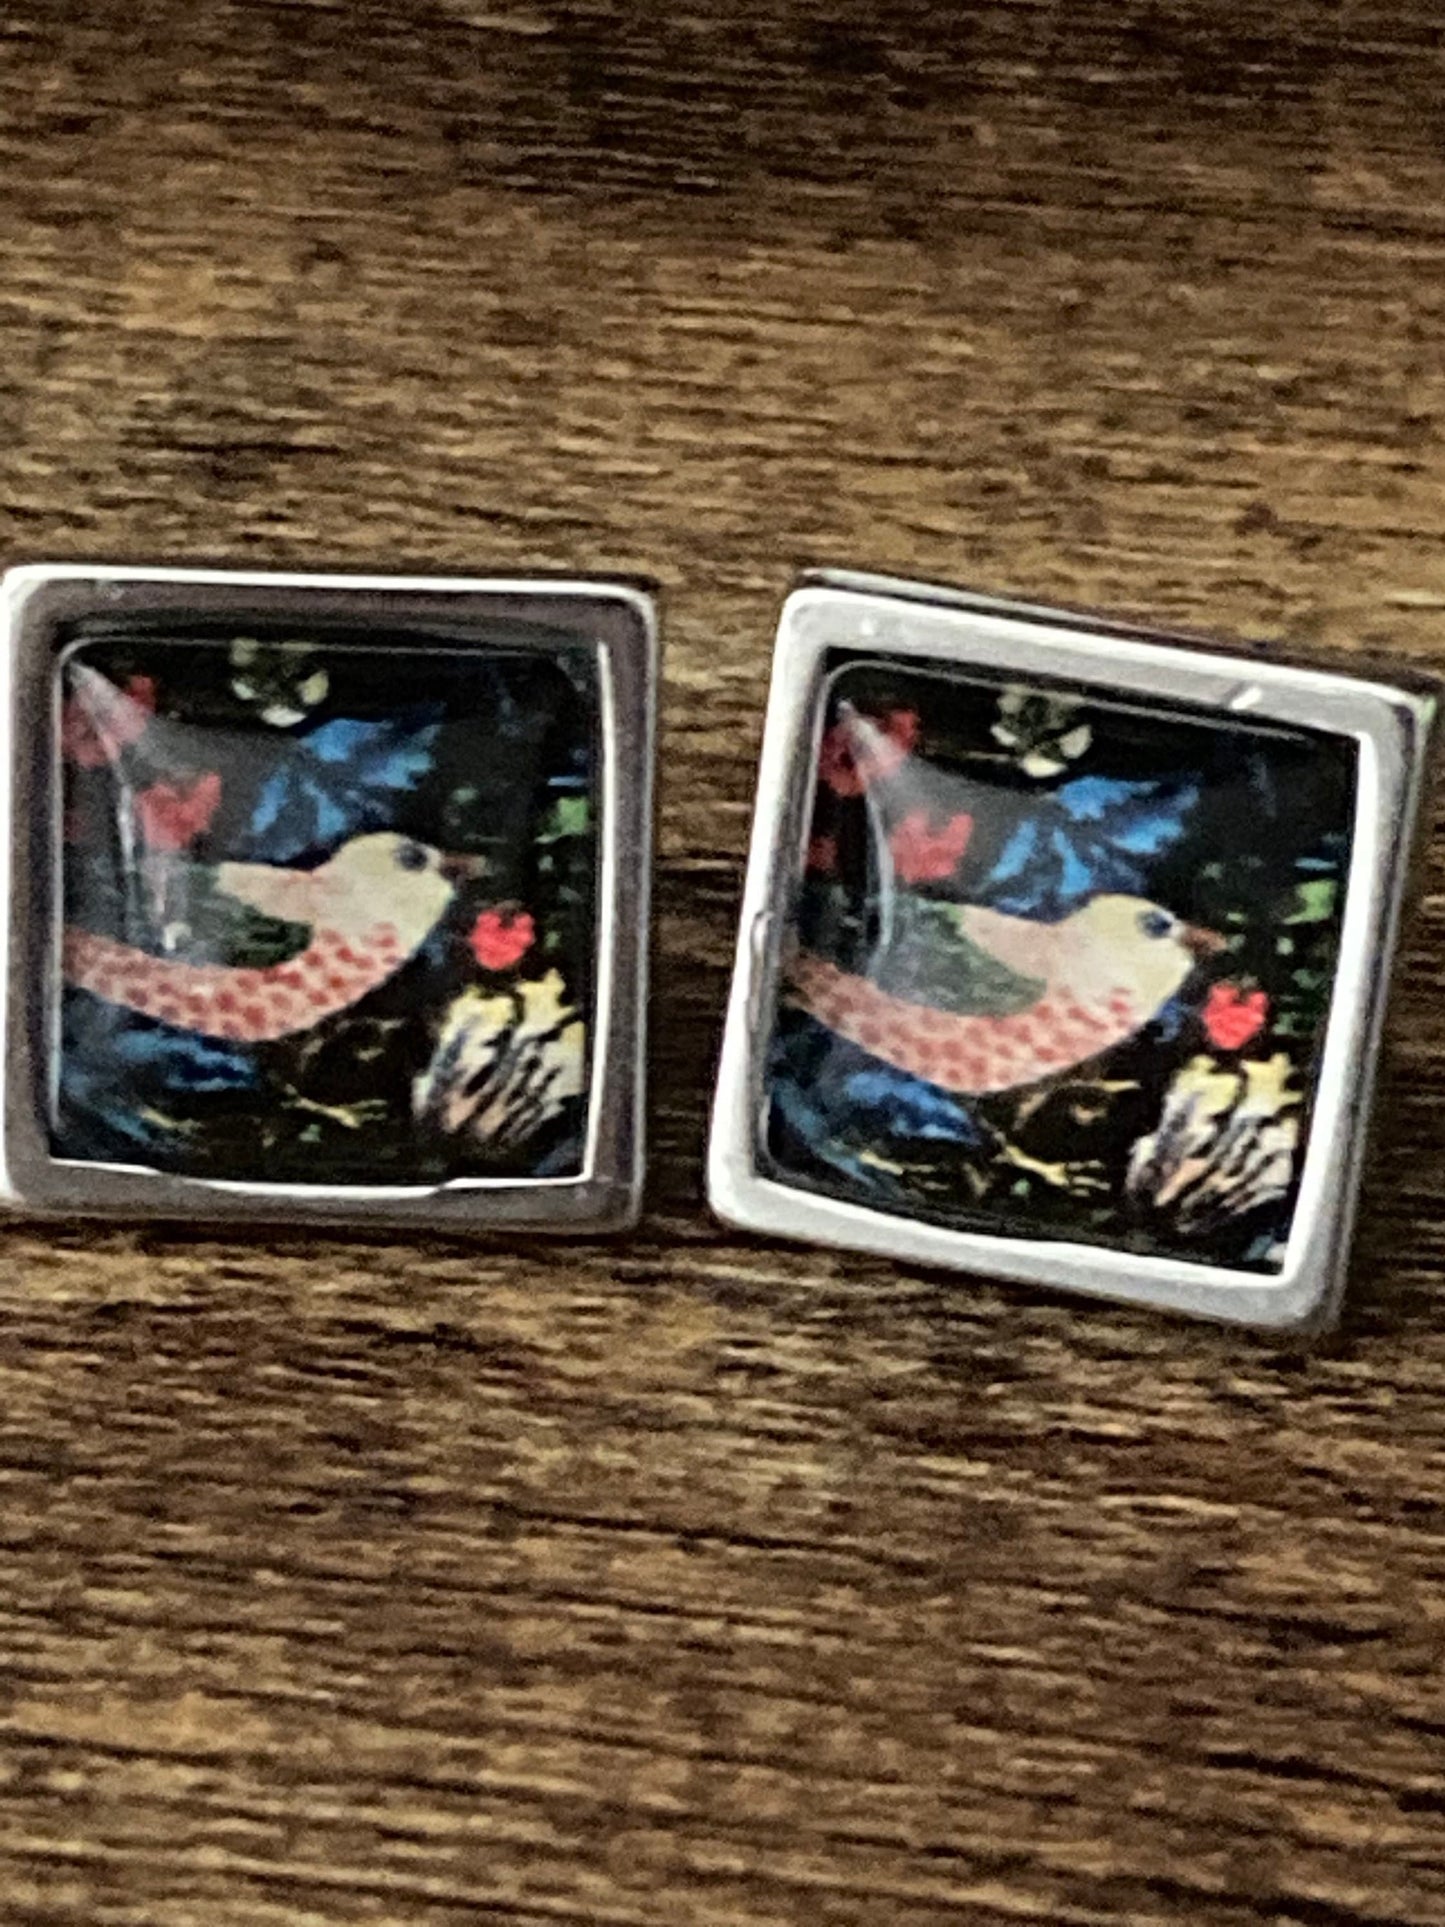 Strawberry thief earrings stainless steel 1.5cm square William Morris print glass studs